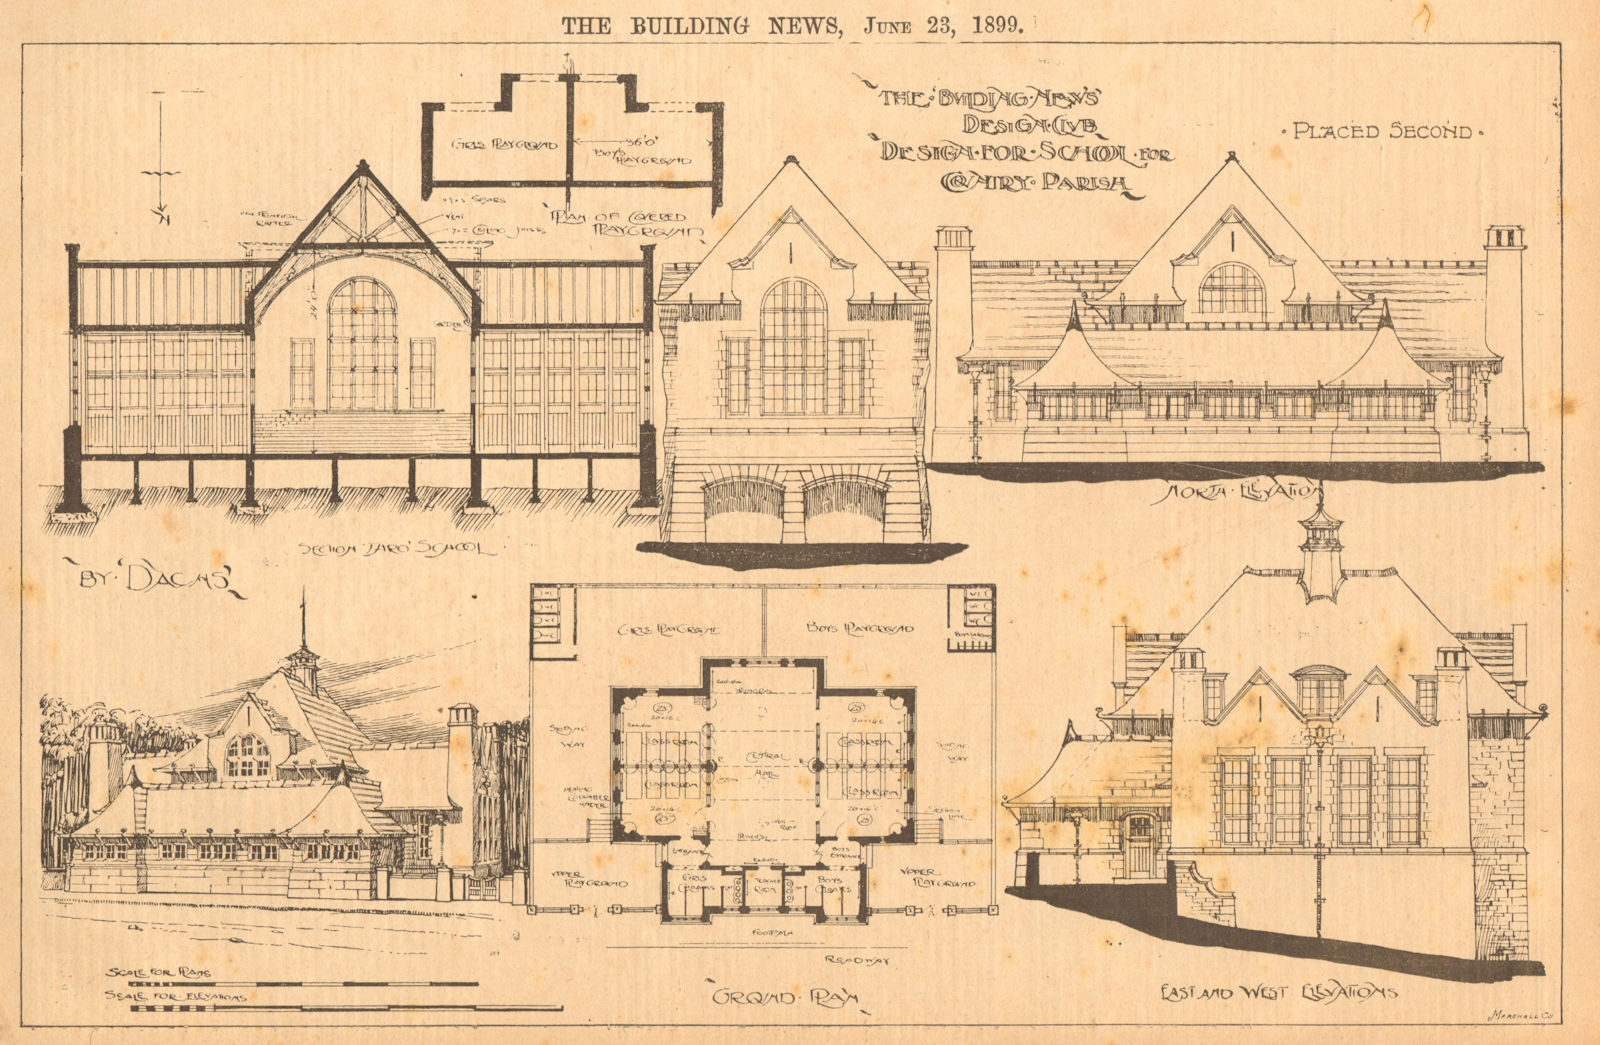 Designed for school for County Parish. Plan & elevations 1899 old print